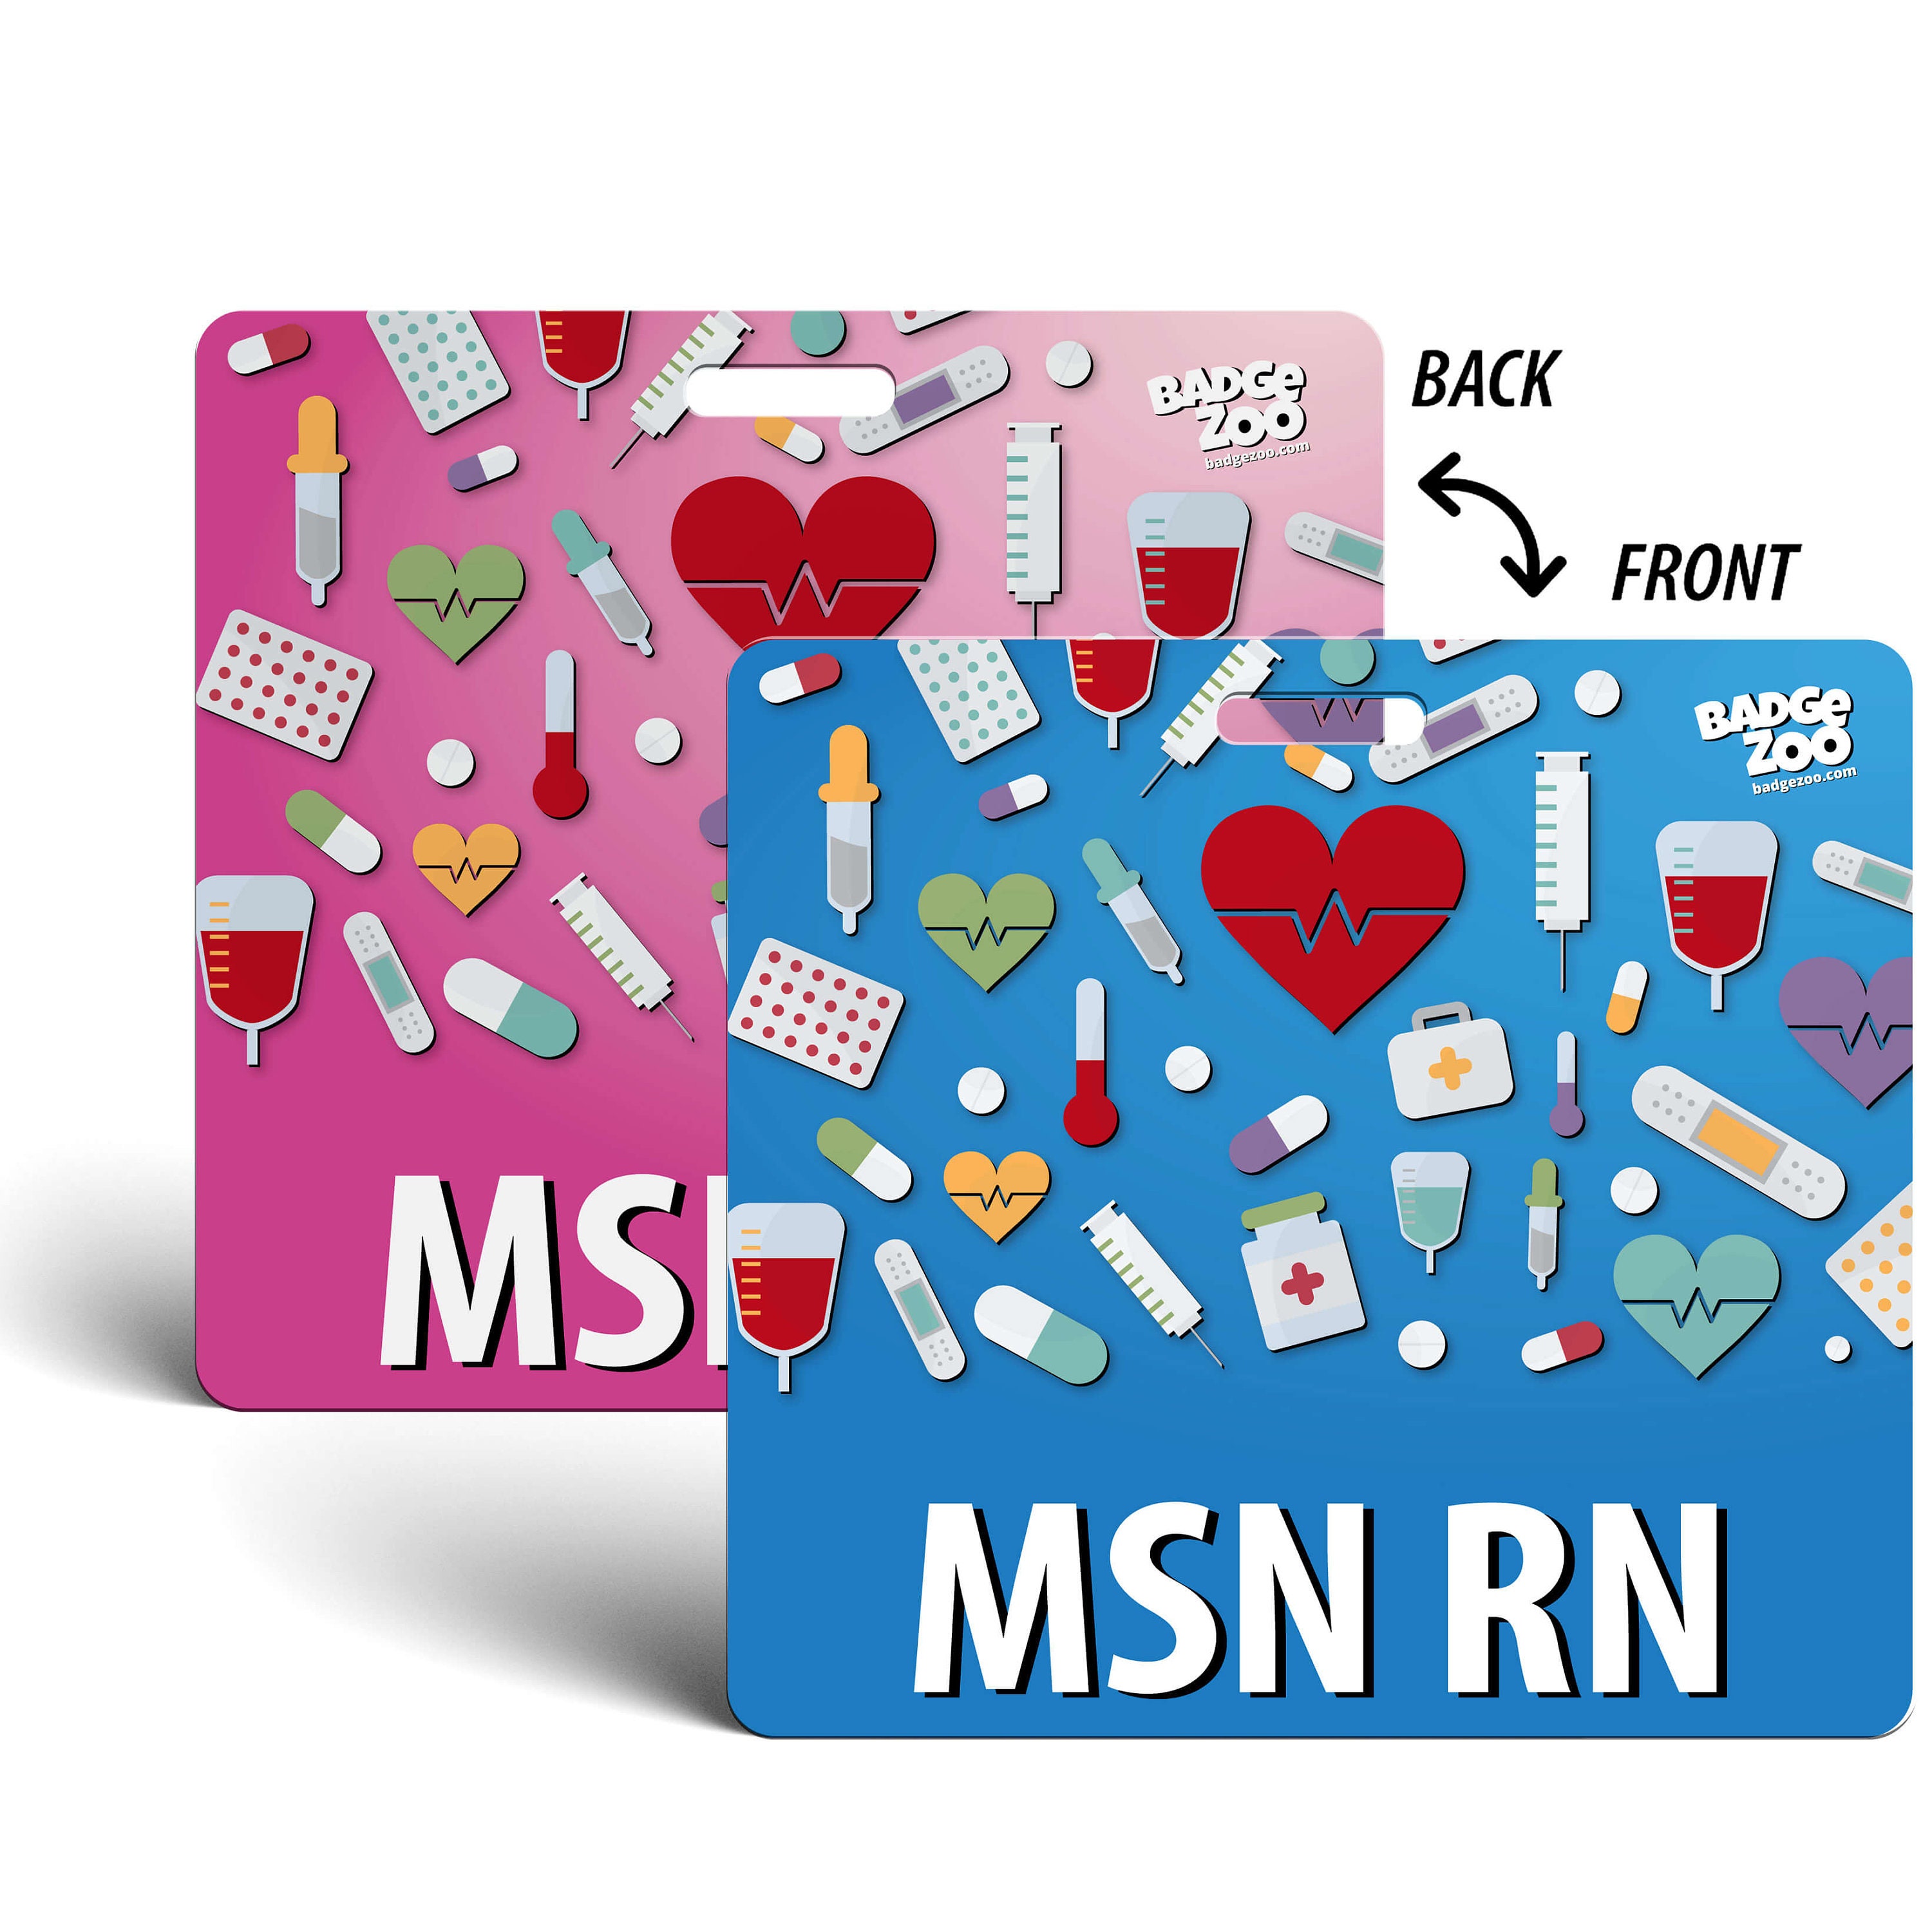 LVN Badge Buddy - pink-blue with Medical Icons - Horizontal' Badge Id Card  for Licensed Vocational Nurses - By BadgeZoo - BadgeZoo